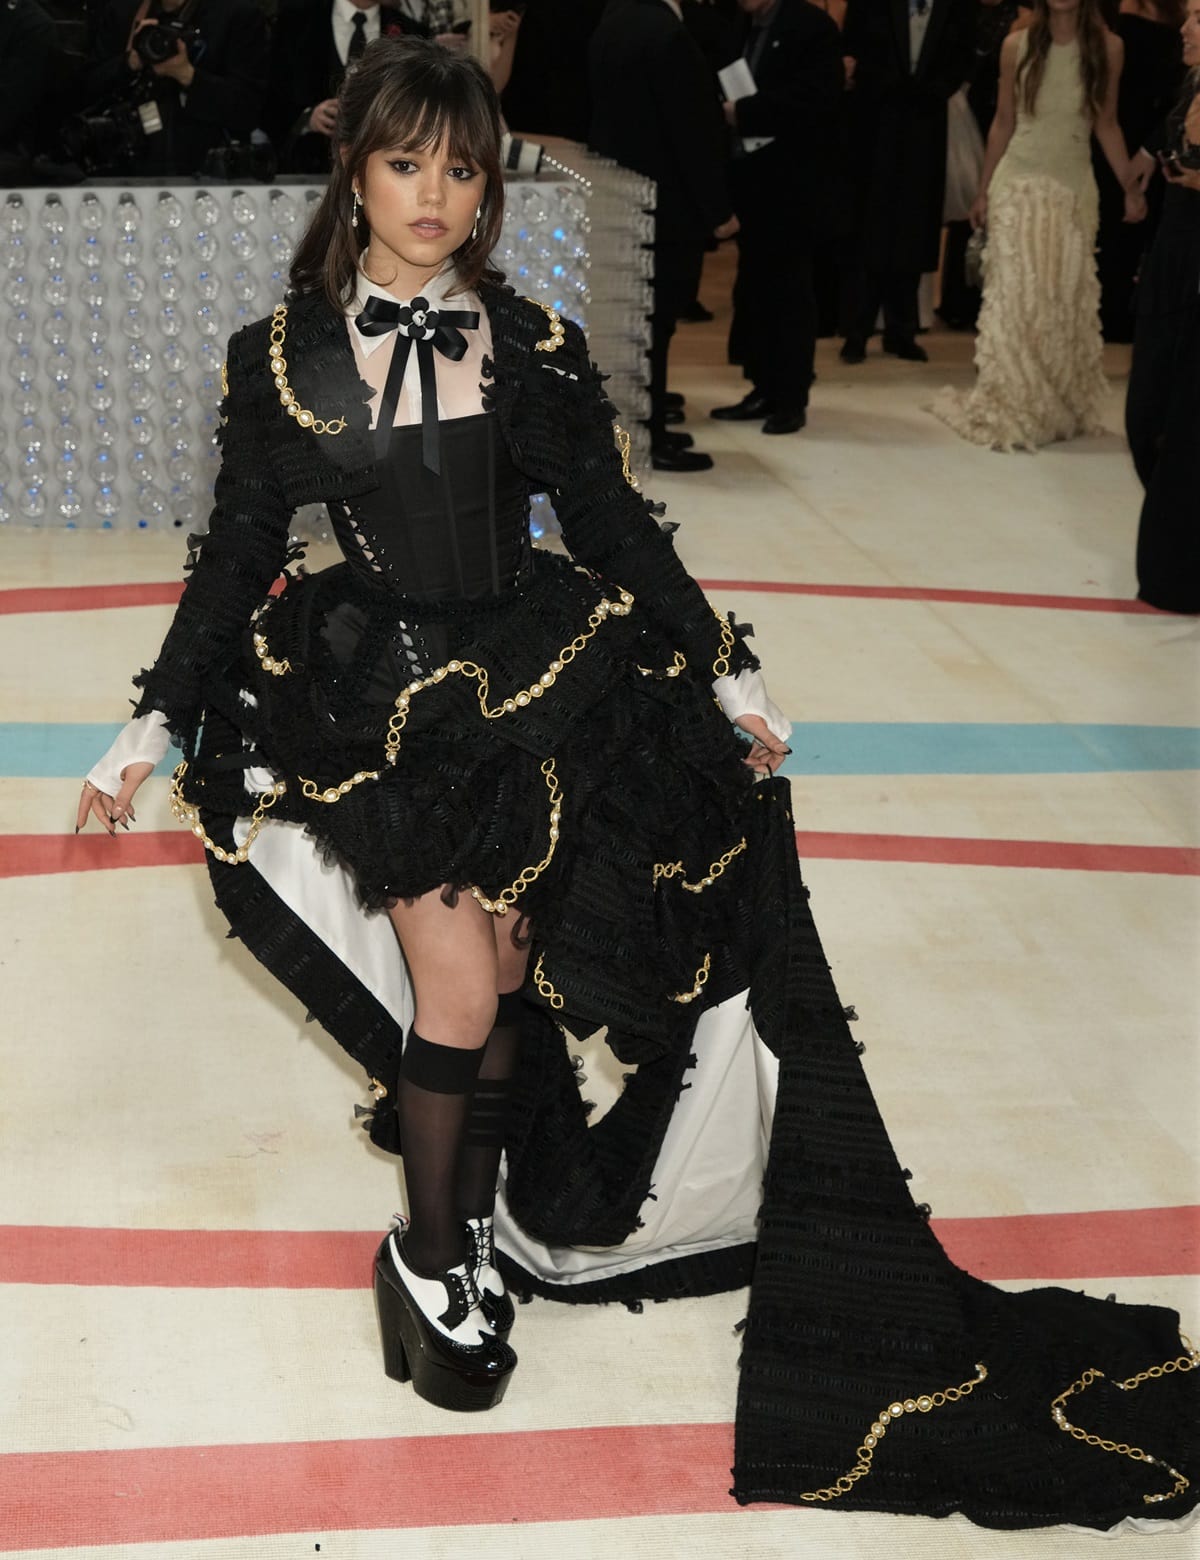 To complete her outfit, Ortega chose to wear Thom Browne’s signature towering Oxford heels boasting glossy black and white color-blocked uppers with classic wingtip detailing